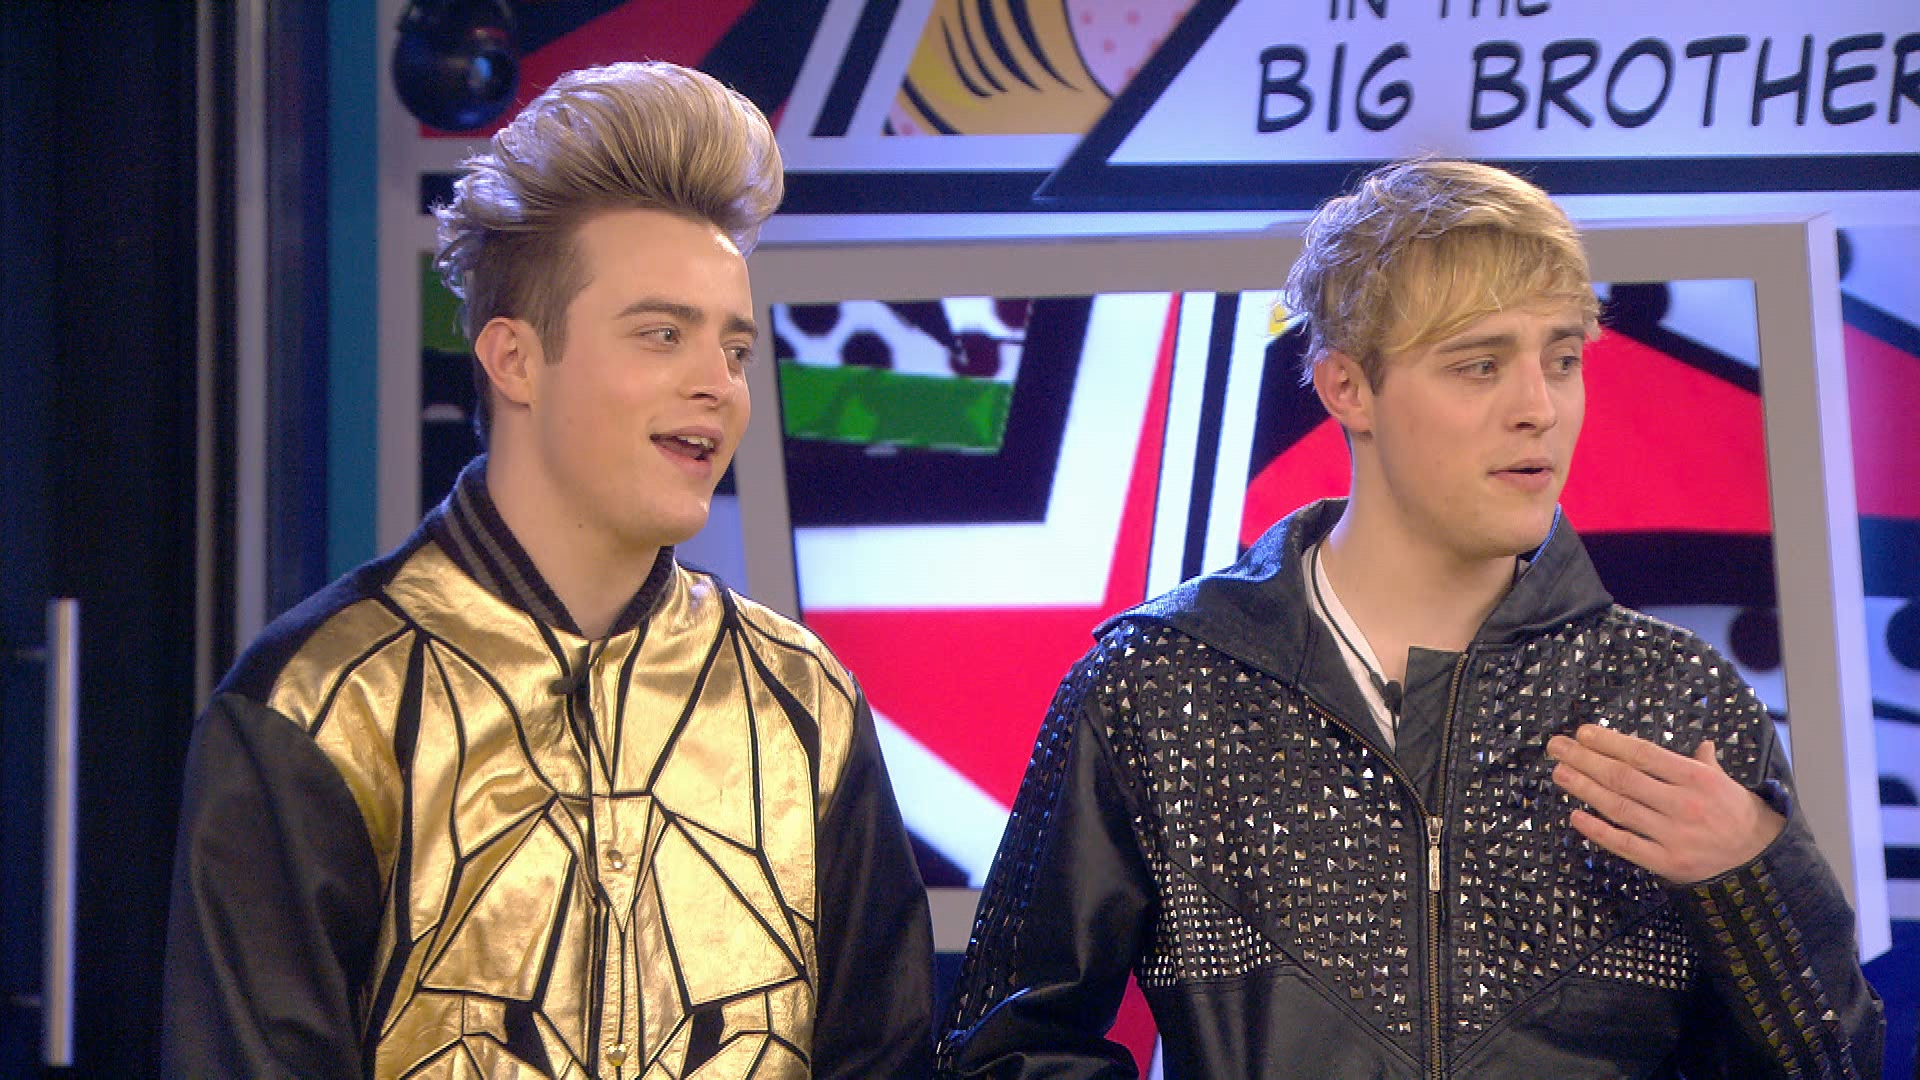 Day 26: Jedward irritate Housemates, who think they’re arrogant